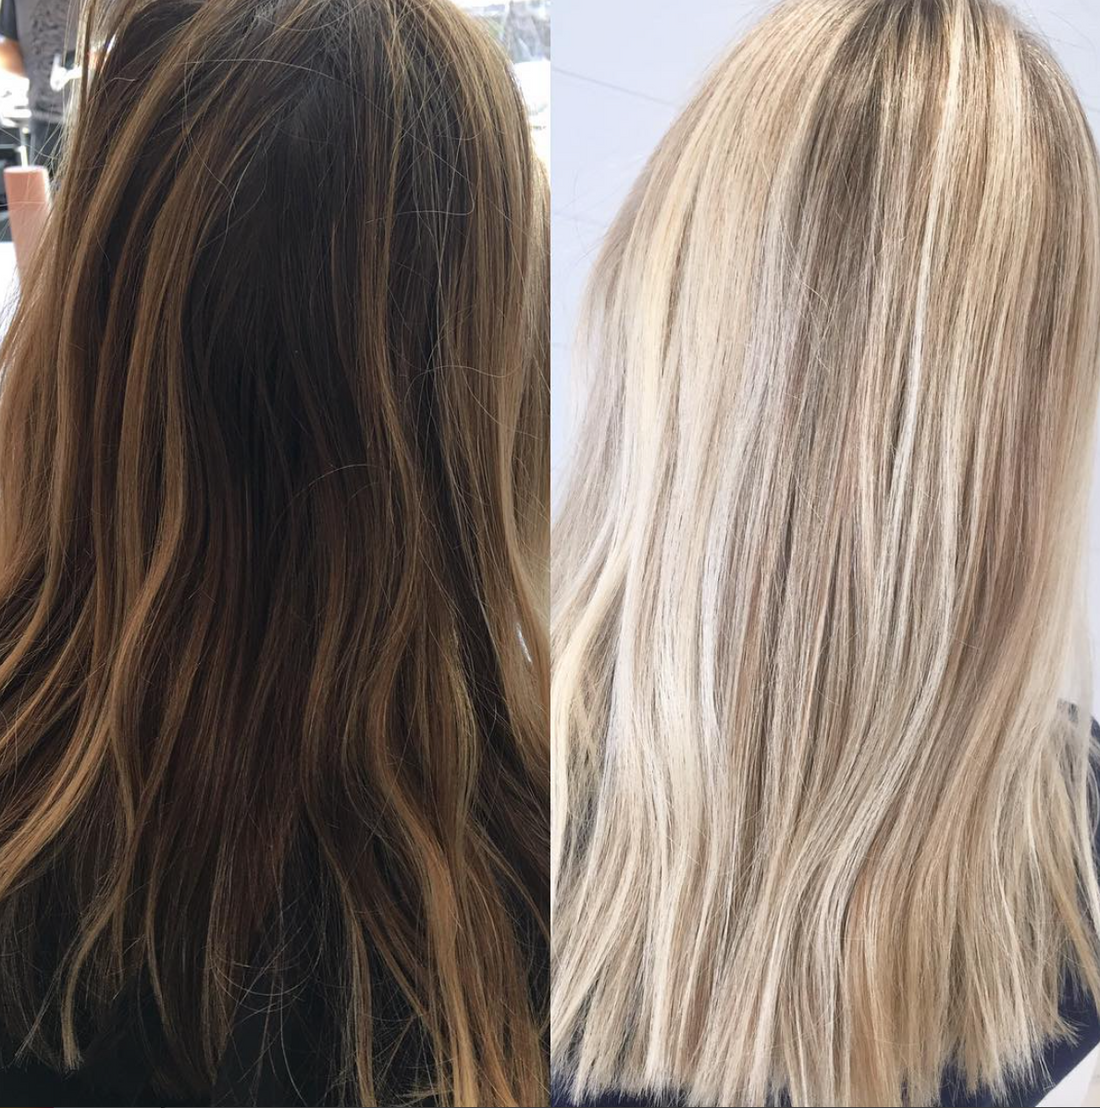 Brunette to bright blonde hair transformation before and after